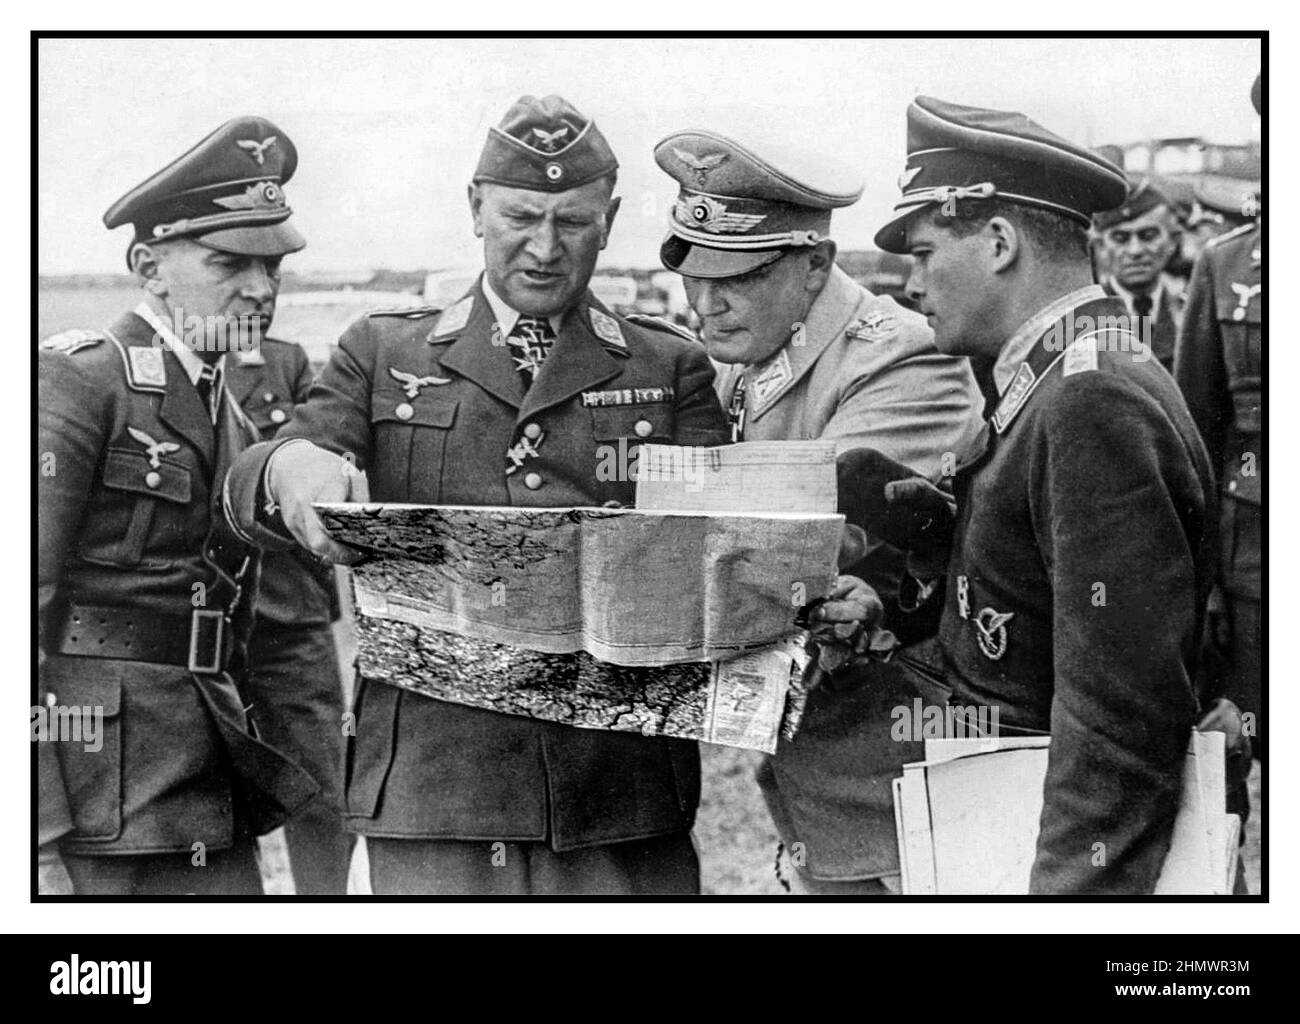 WW2 Nazi Propaganda image of The Luftwaffe commander, Marshal Hermann Goring (second from the right) with senior air force officers browse and discuss the map of combat operations on the Western Front. World War II Date September 1940 Stock Photo